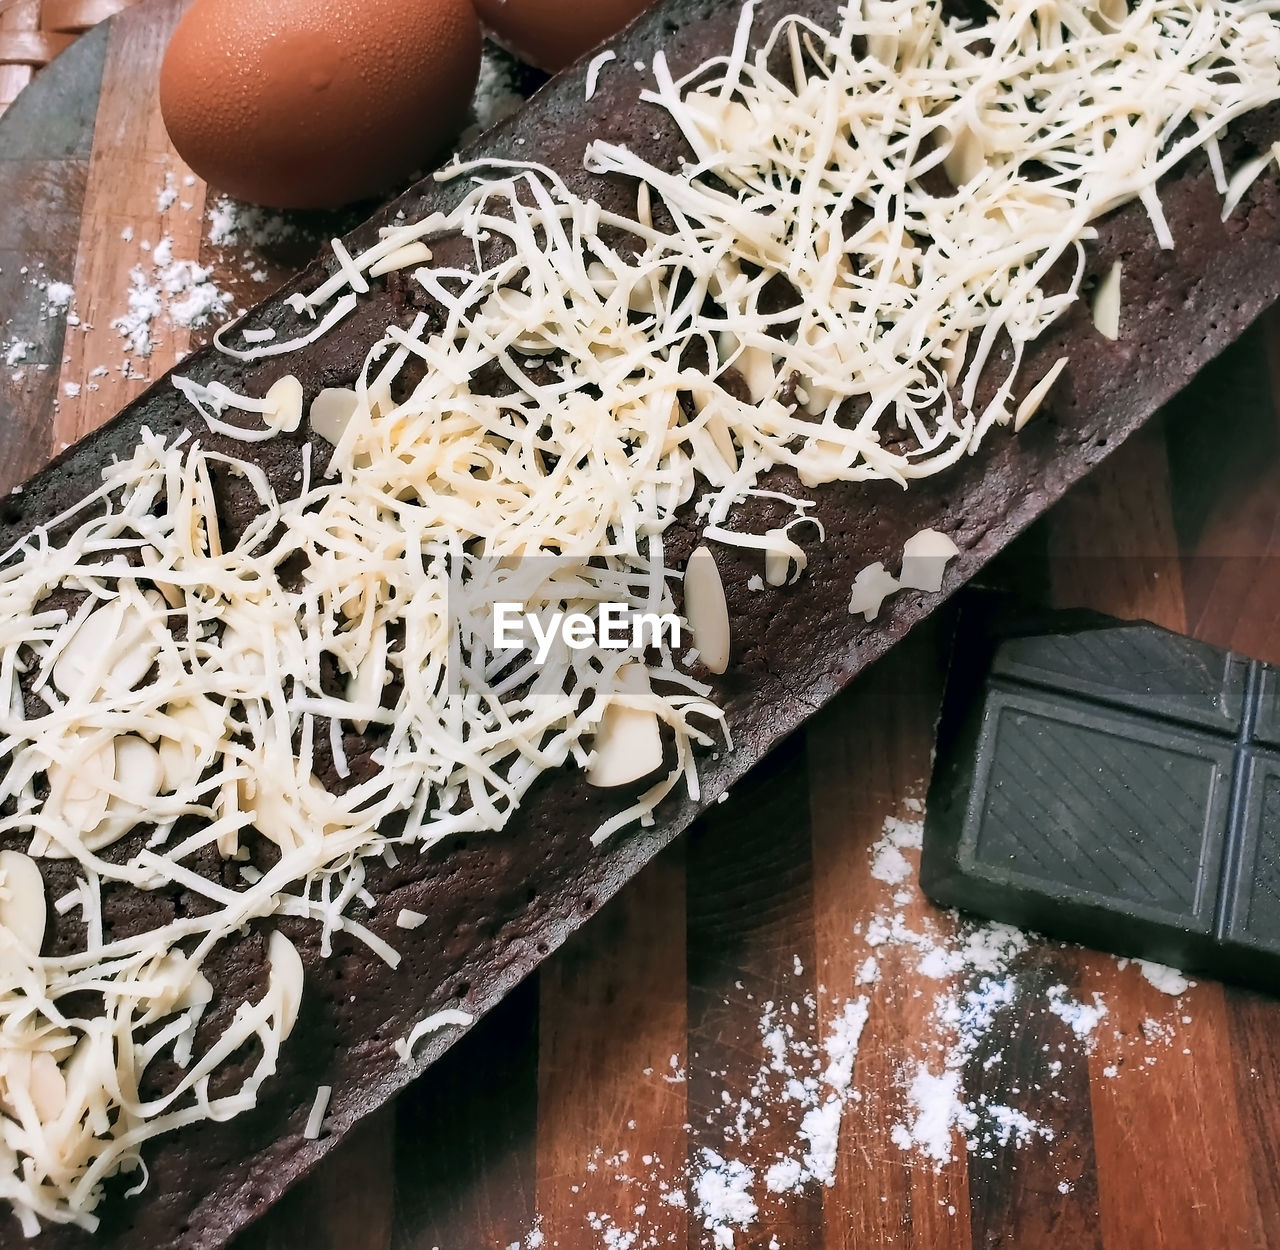 food, food and drink, freshness, wood, egg, indoors, no people, healthy eating, still life, raw food, wellbeing, ingredient, table, flour, high angle view, pasta, baked